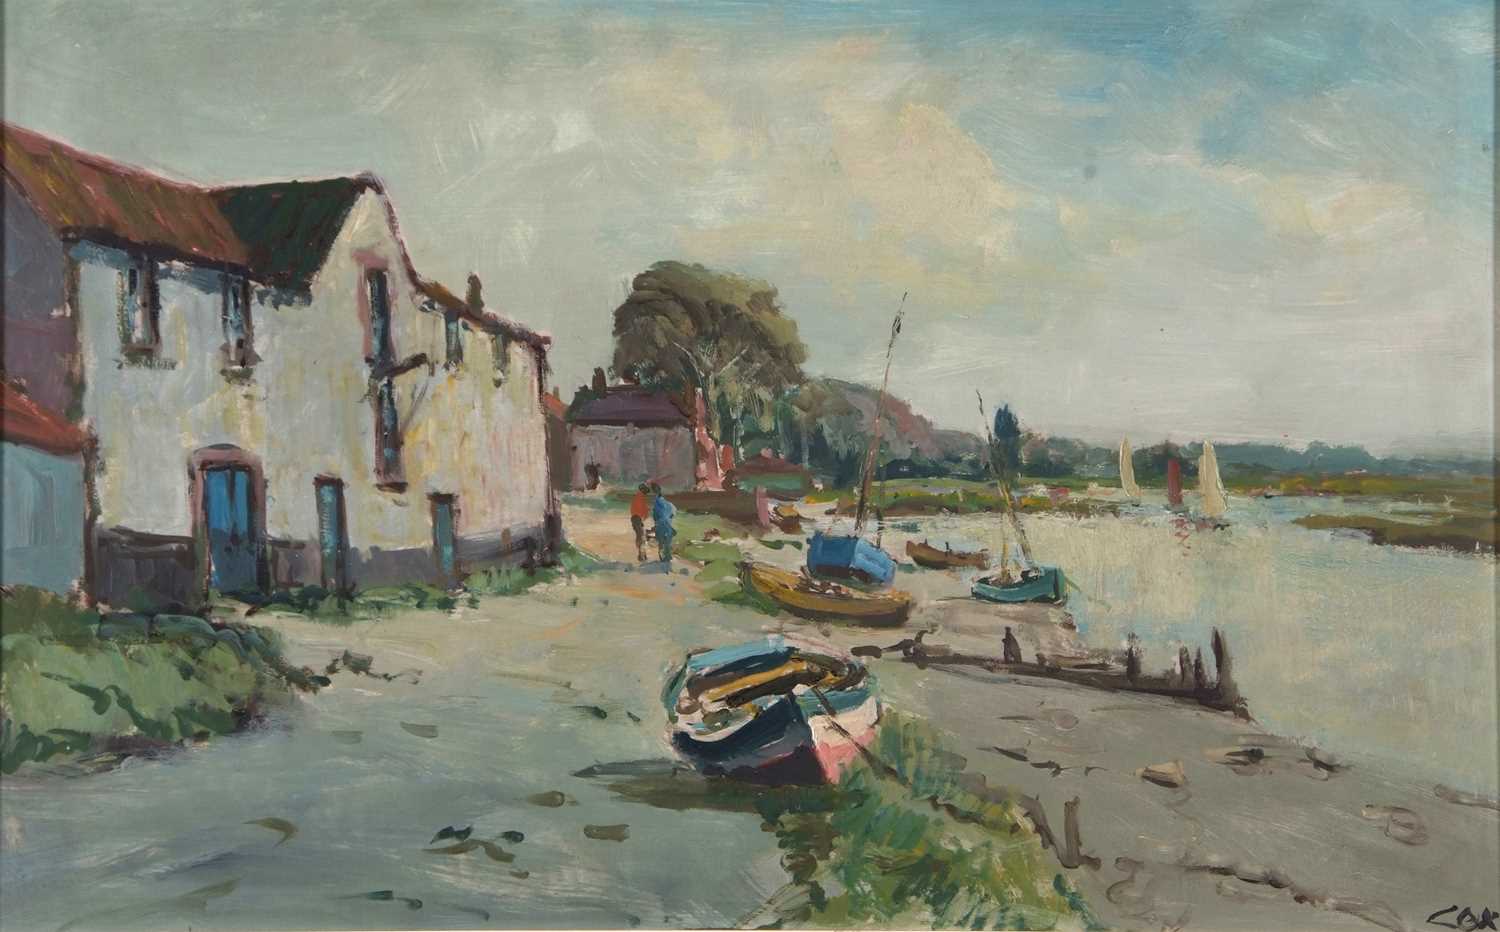 Jack Cox (British, 1914-2007), Burnham Overy Staithe, oil on board, signed, 13x21ins, framed - Image 2 of 2